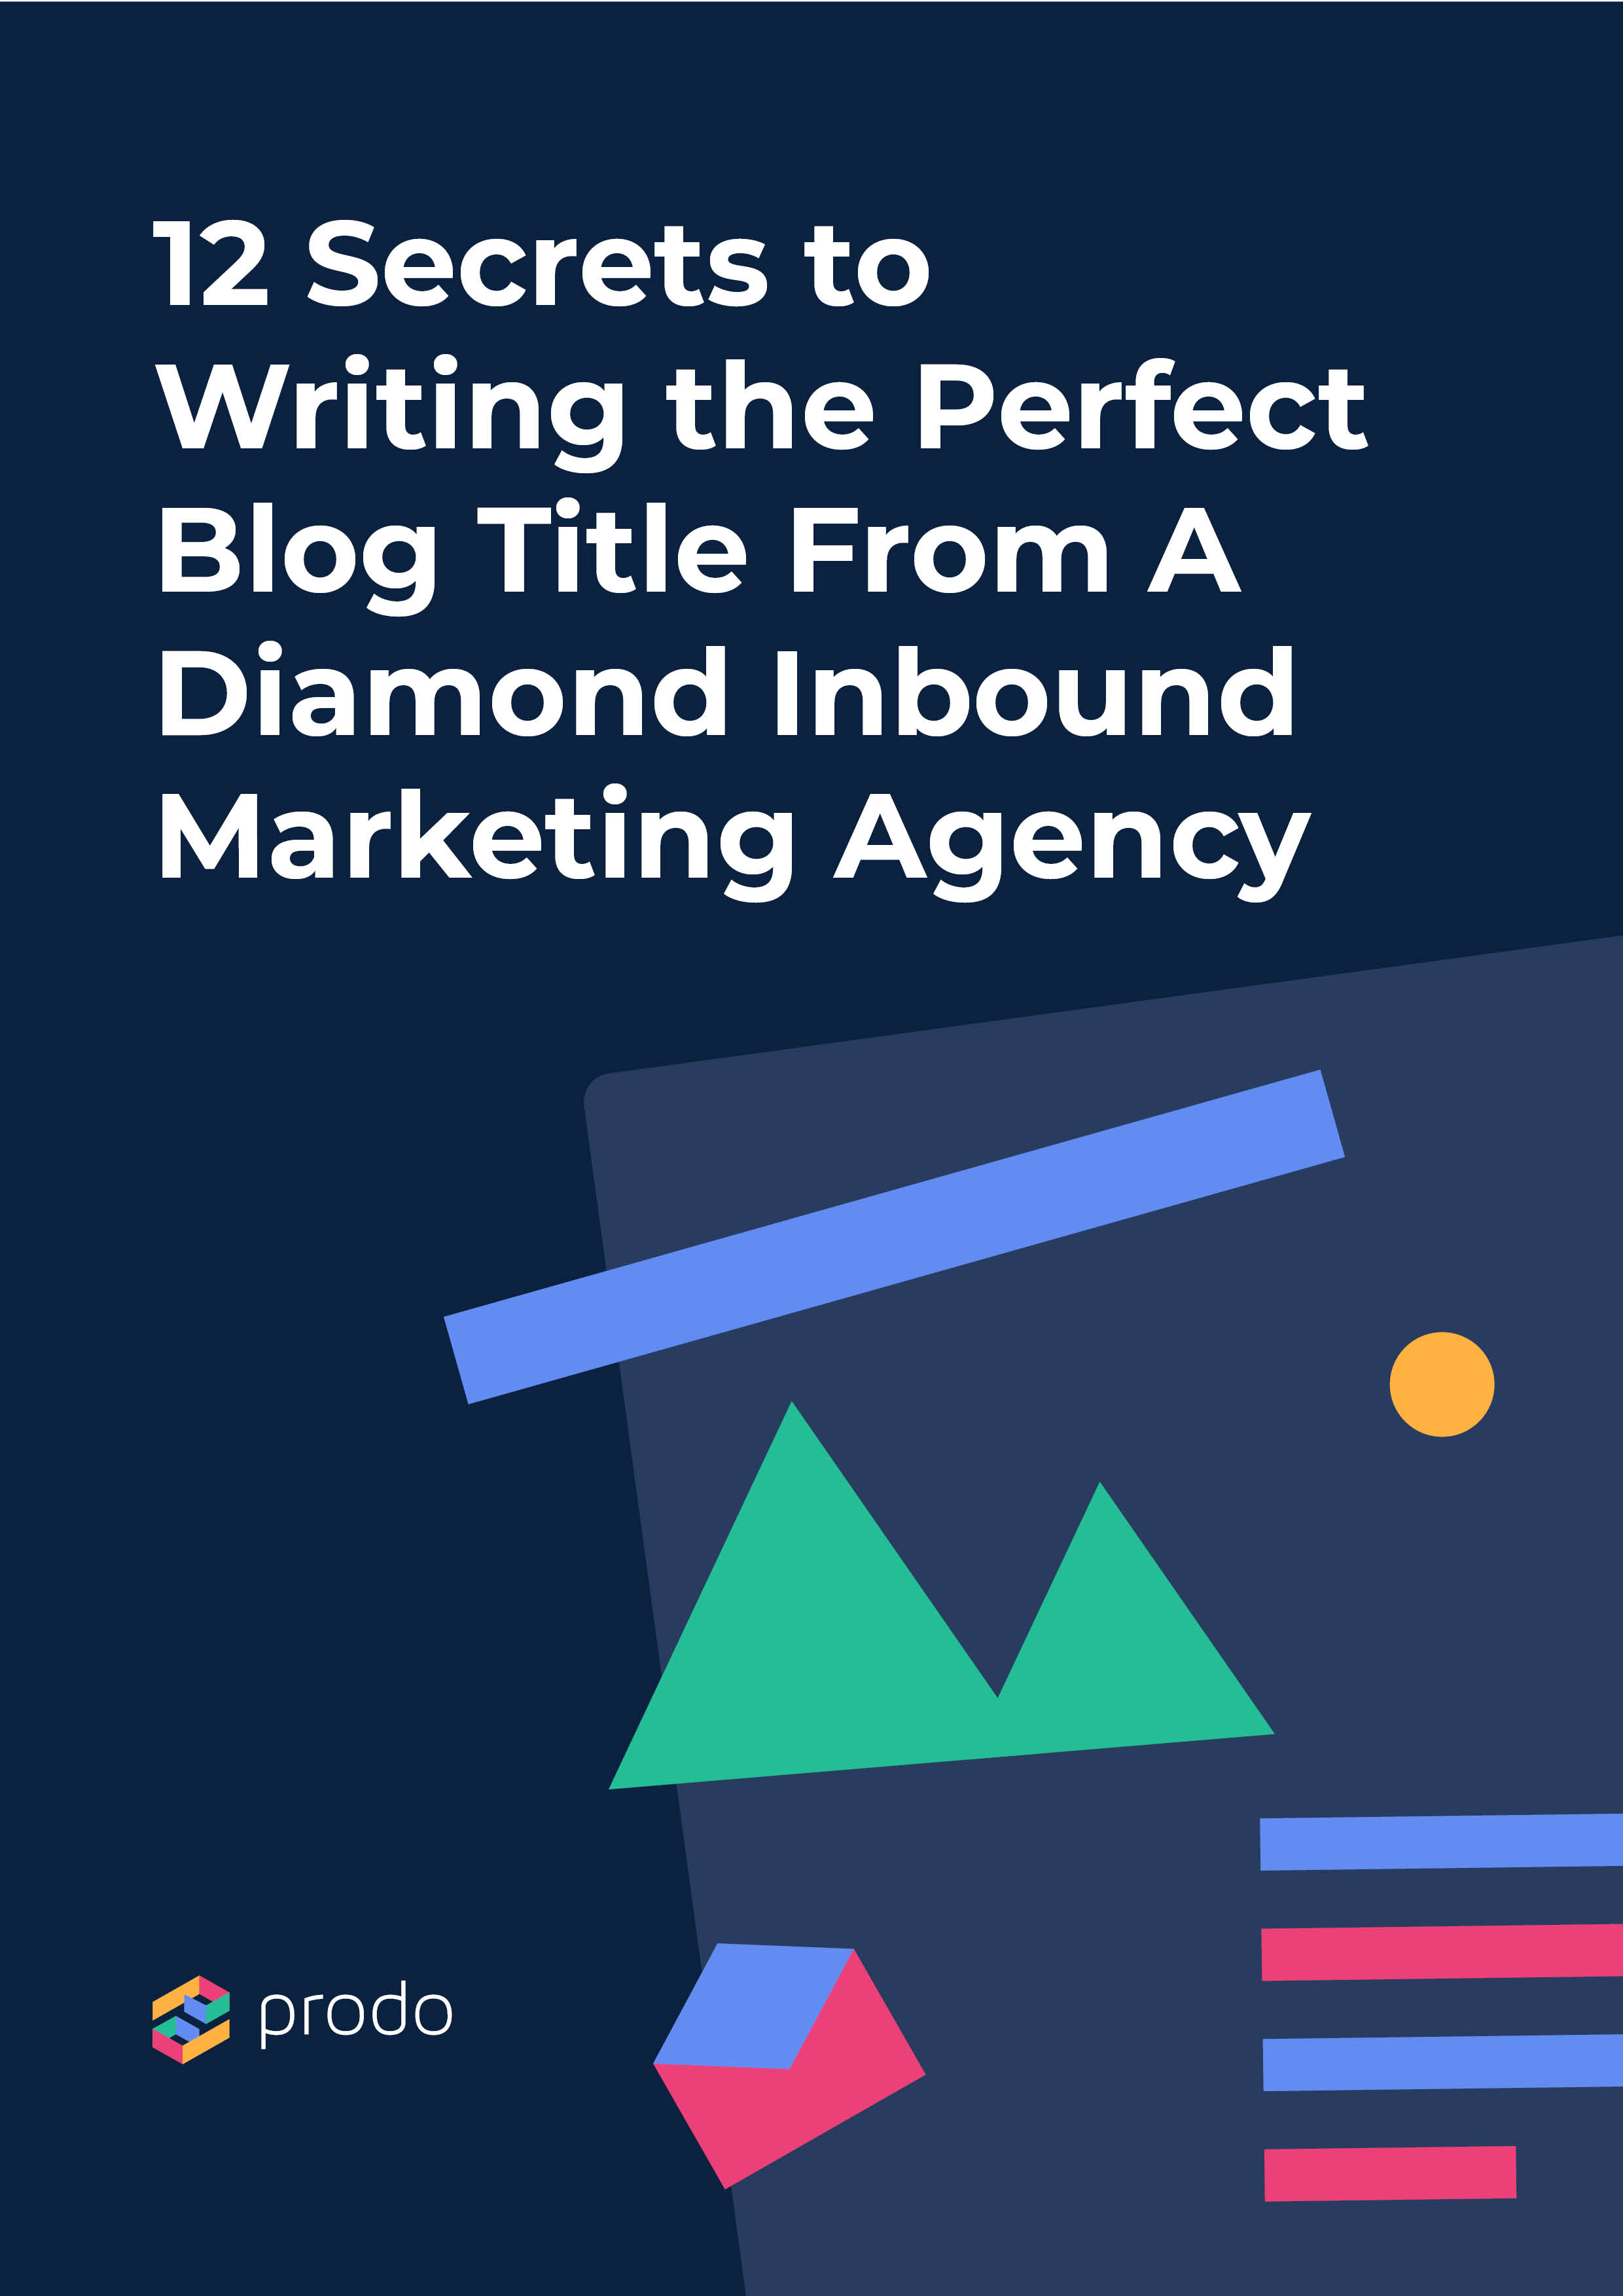 12 Secrets to Writing the Perfect Blog Title From A Diamond Inbound Marketing Agency